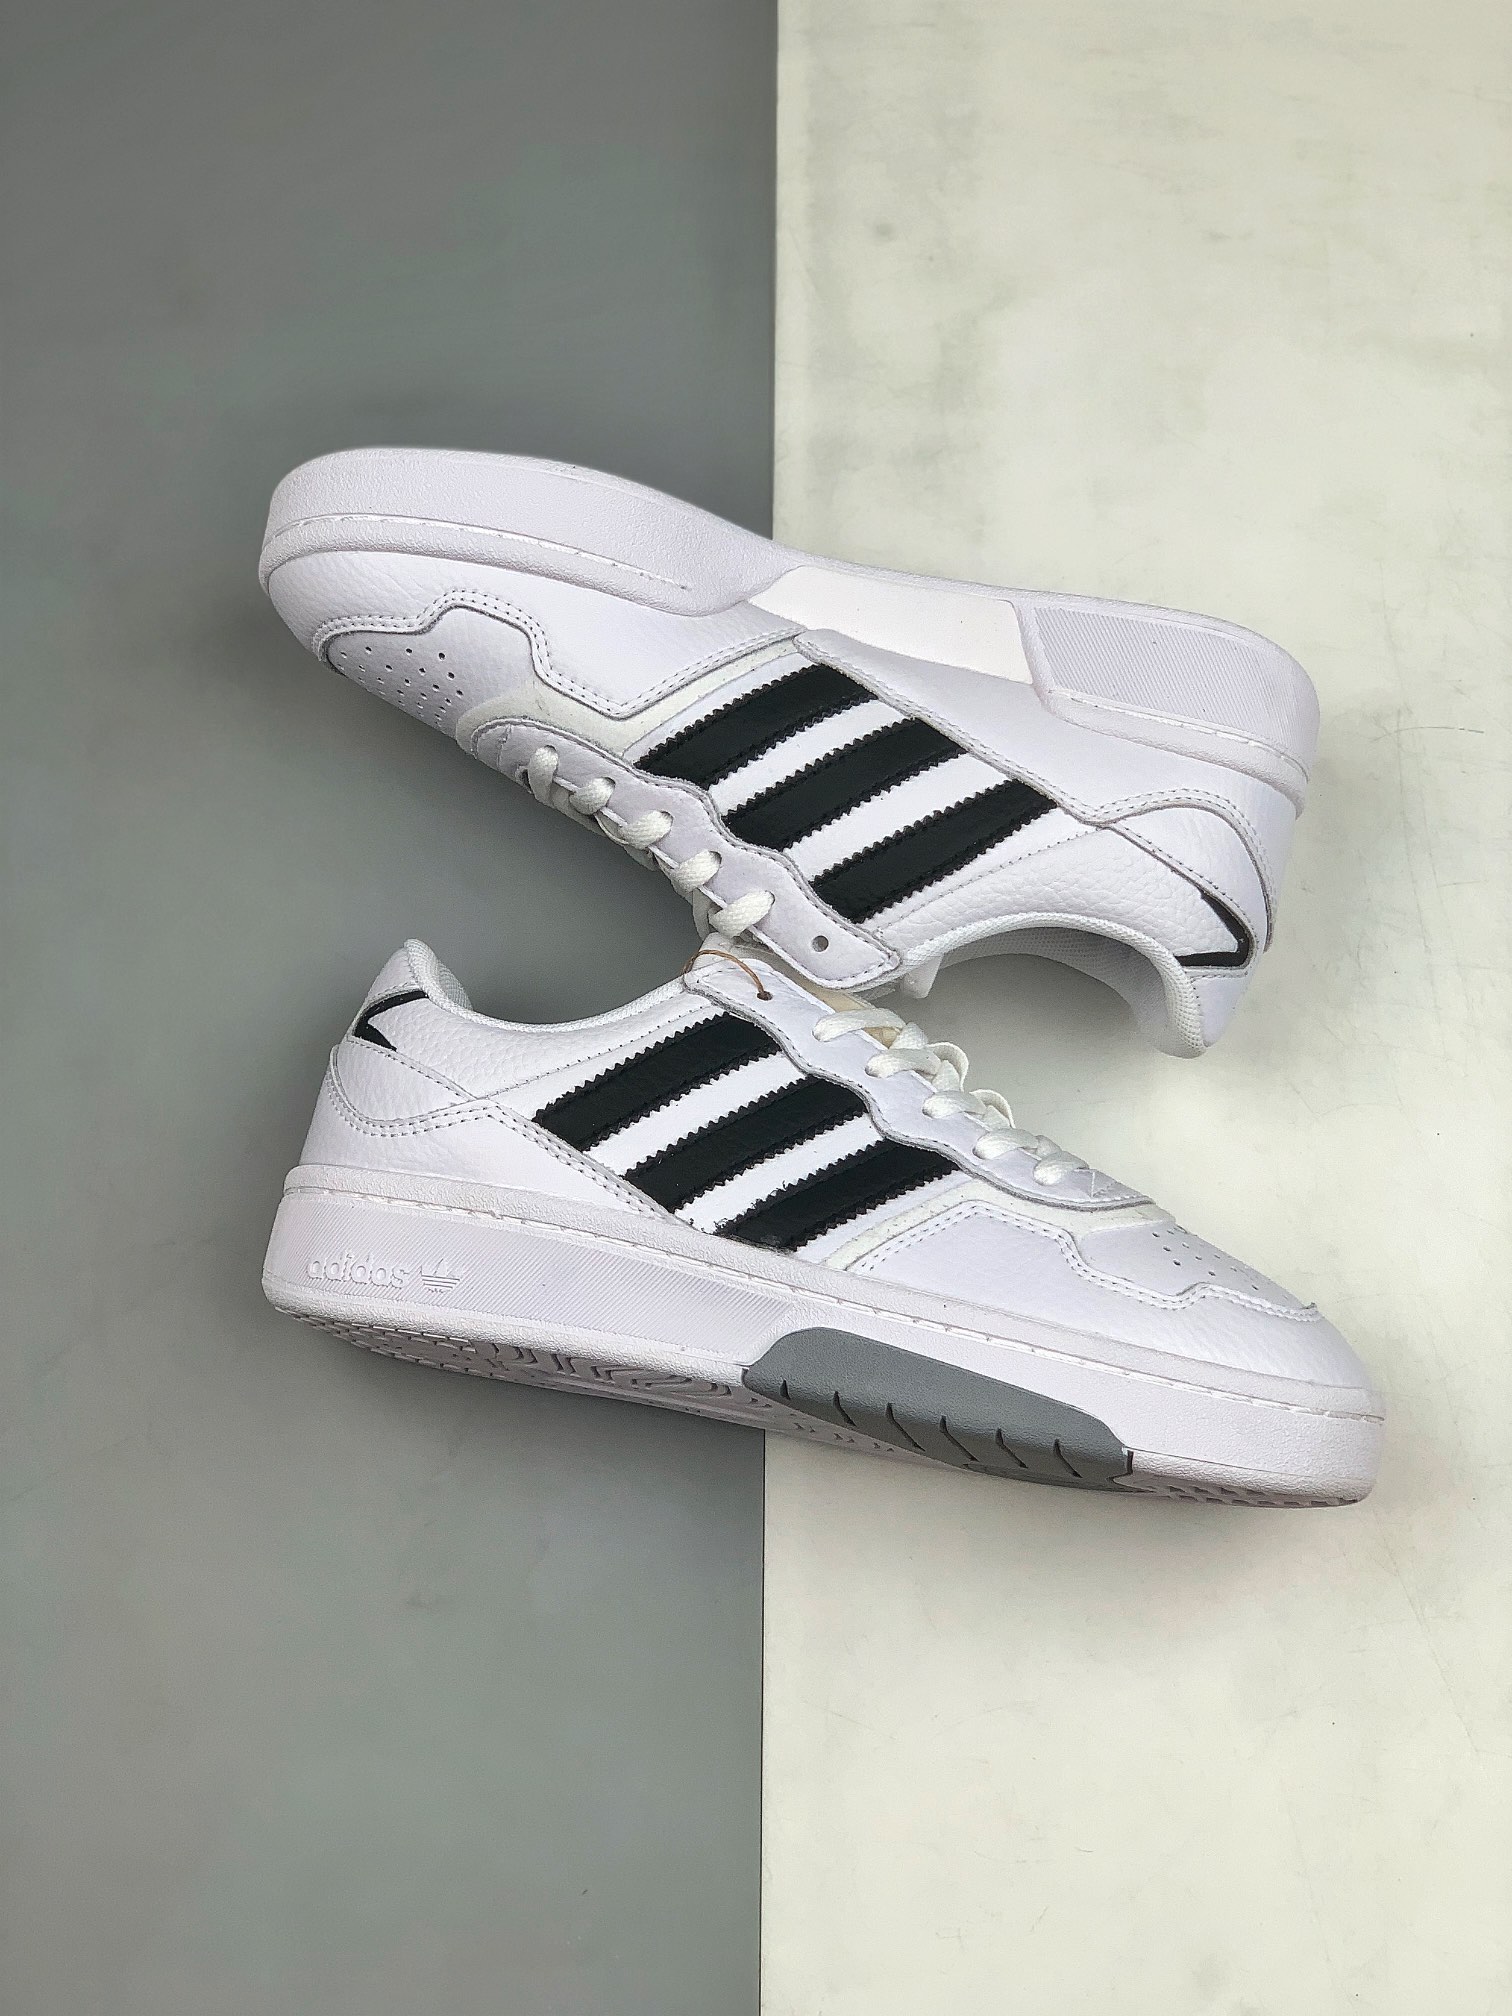 Adidas Courtic GX6318 - The Ultimate Court Shoe for Athletes